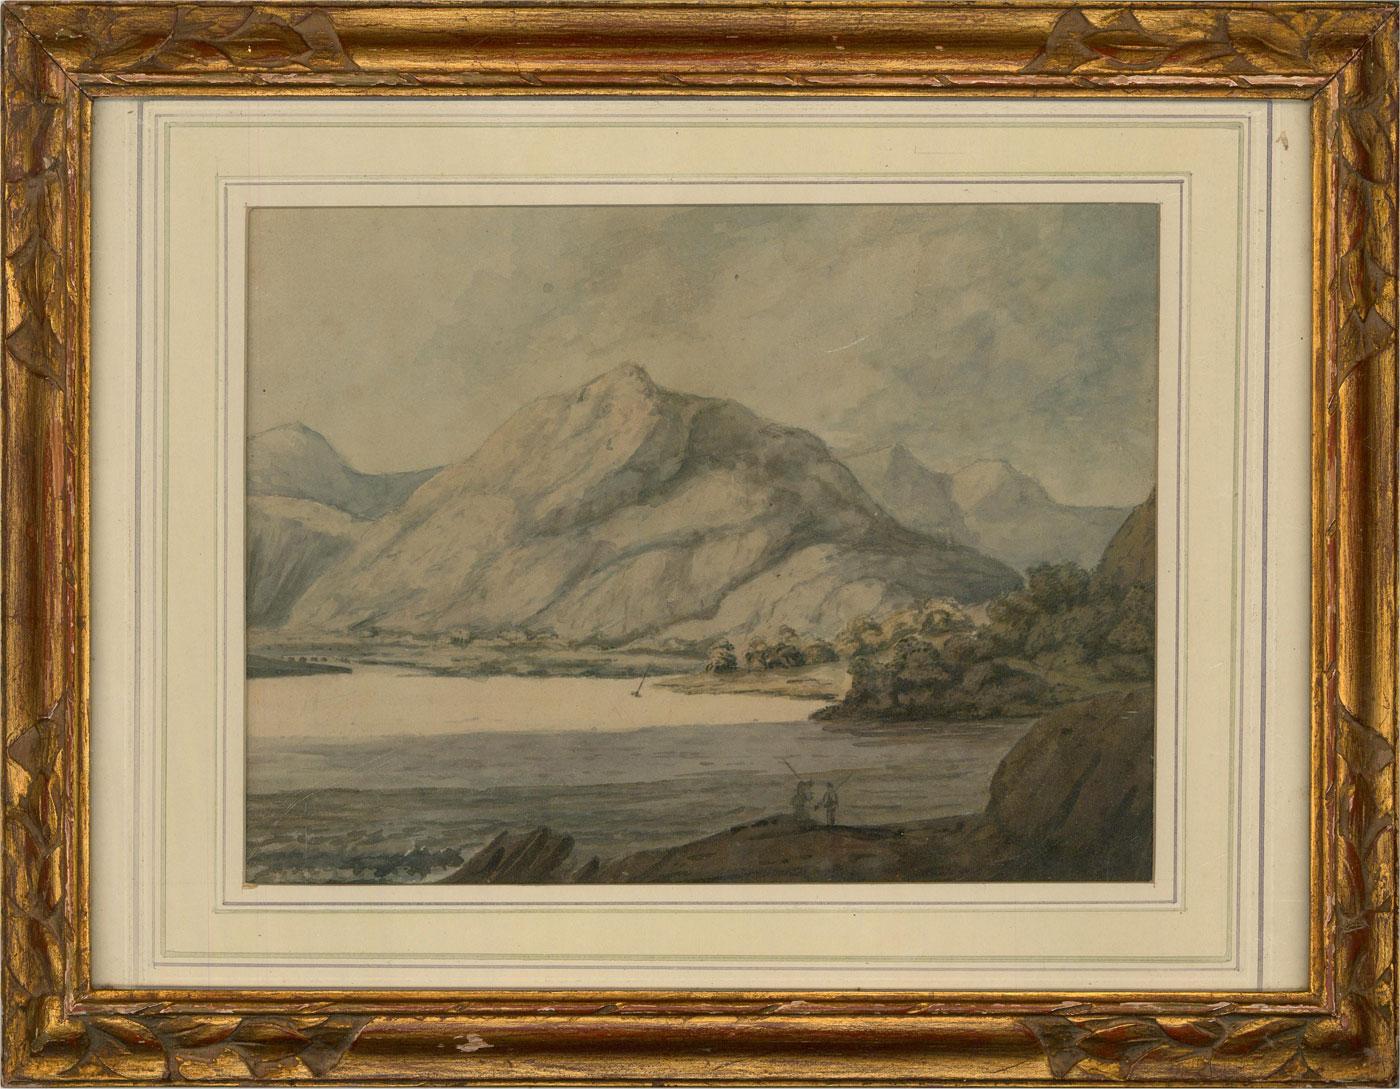 A fine early 19th Century watercolor view of Loch Long in Argyll, Scotland. The painting is unsigned and presented in a carved wood frame with thin gilt and a wash-line mount. On wove.
